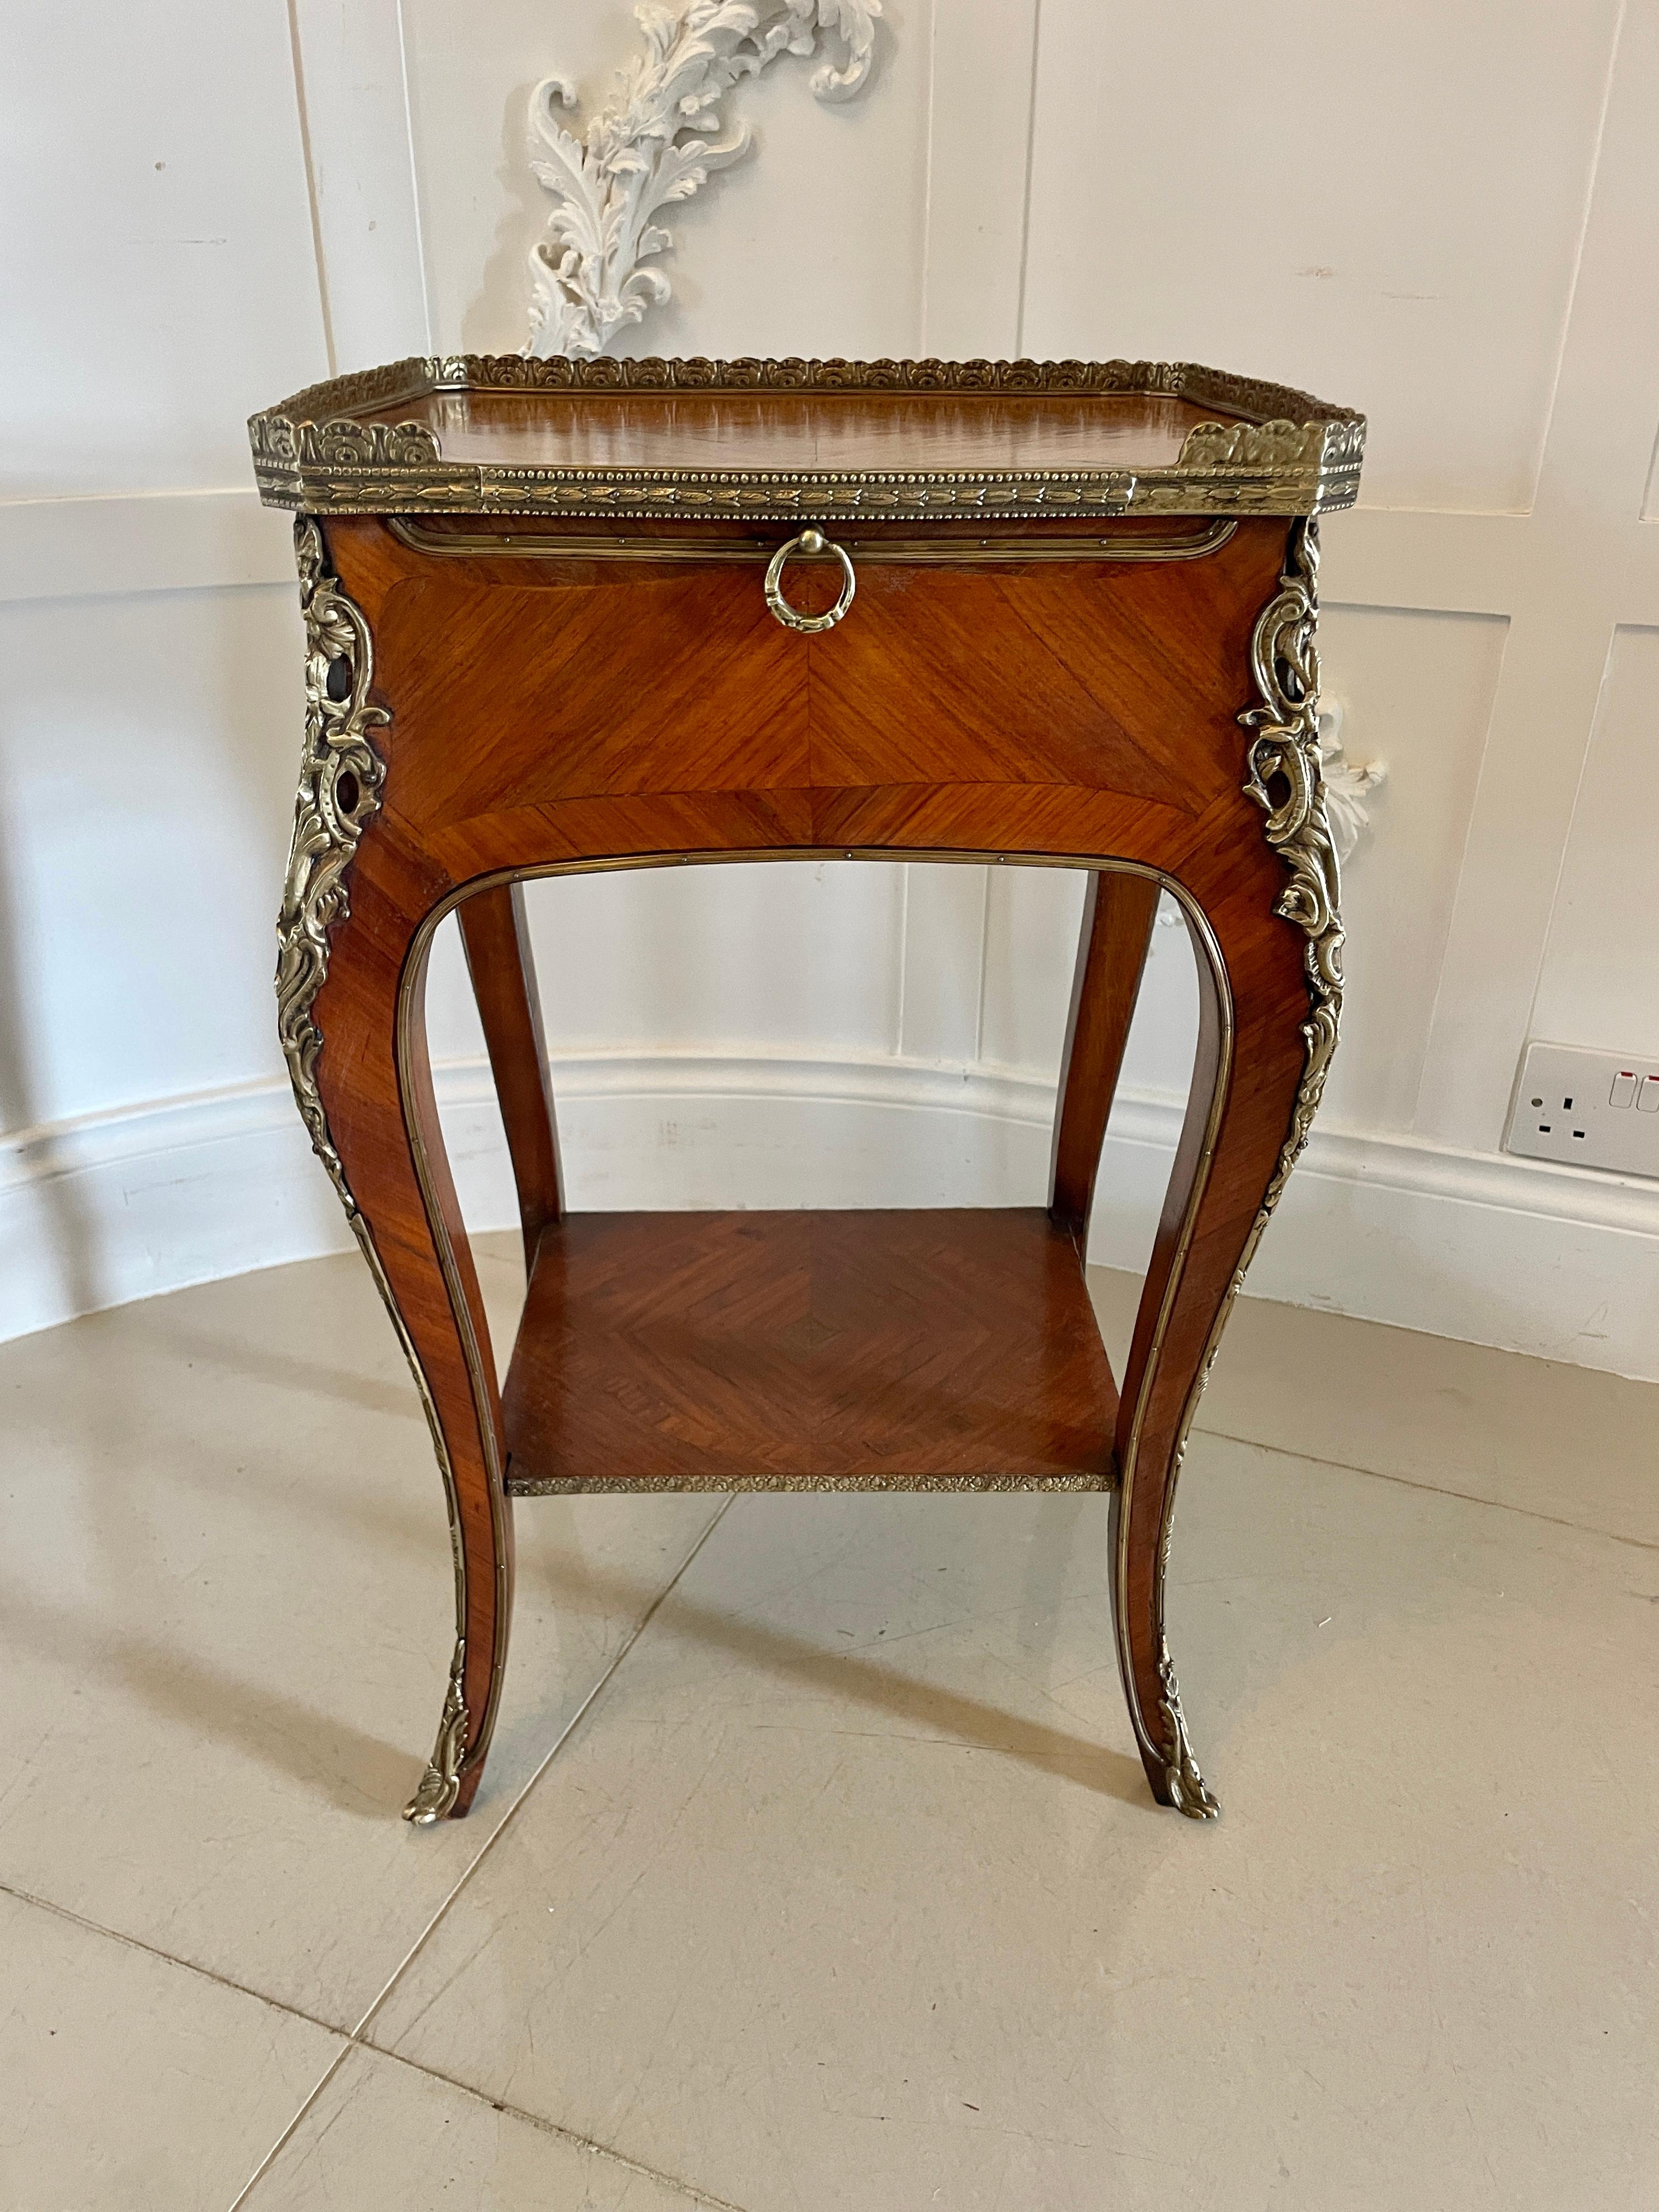 Fine Quality Antique Freestanding French Kingwood and Ormolu Mounted Lamp Table For Sale 9